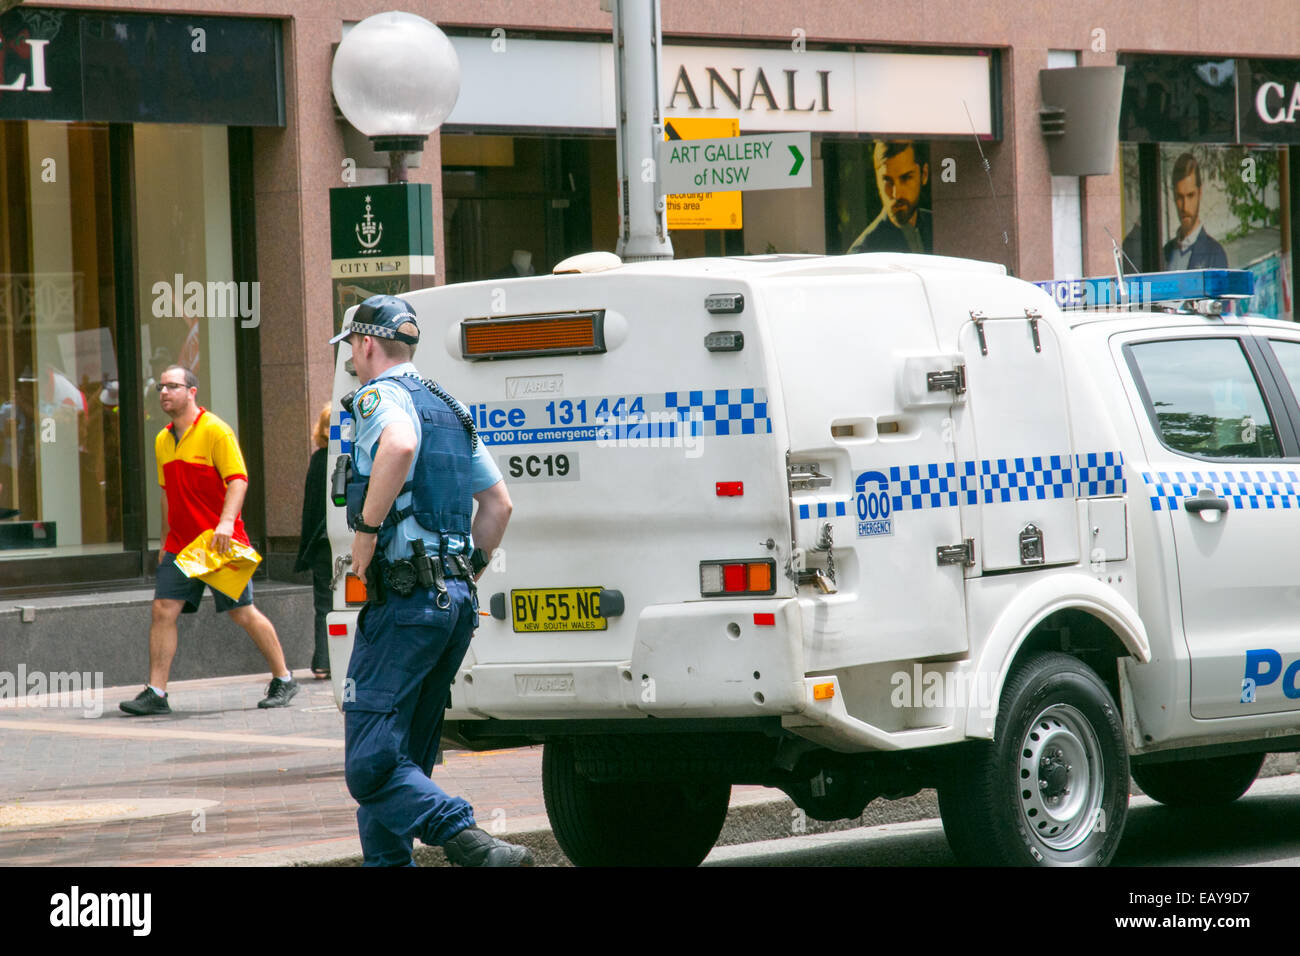 NSW Police officer with his police vehicle car in Macquarie street,Sydney CBD,NSW,Australia Stock Photo